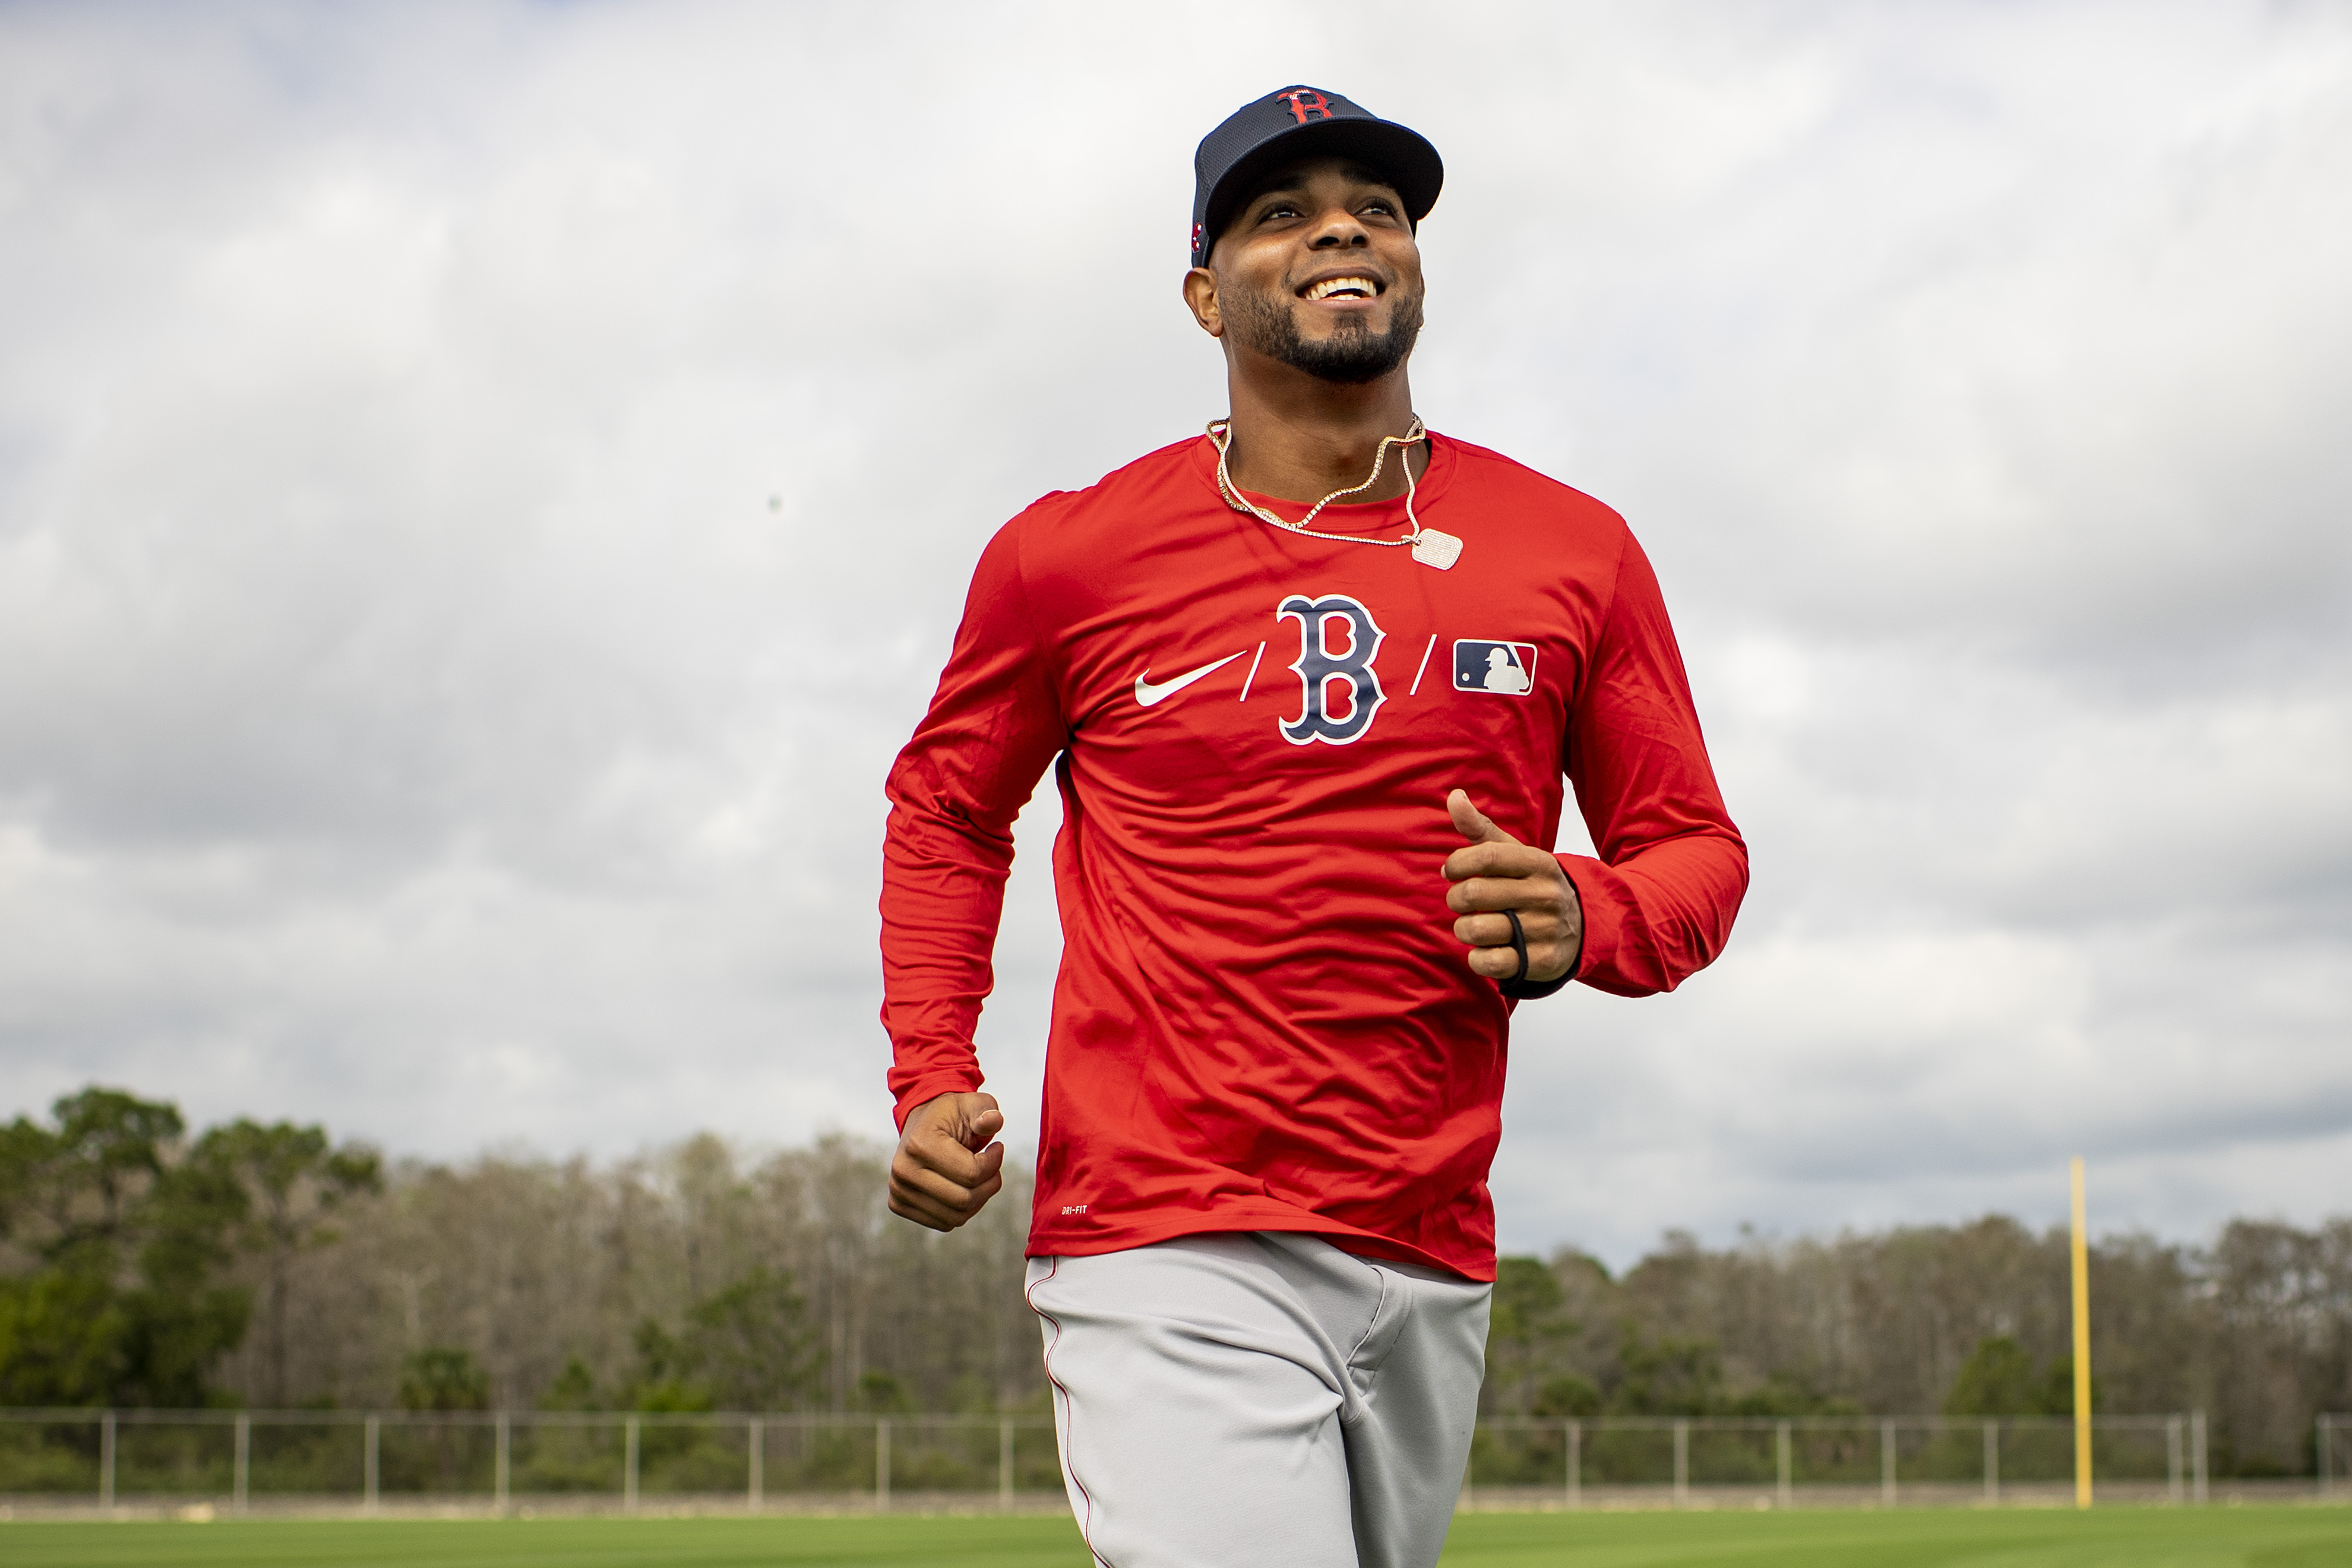 Boston Red Sox's Xander Bogaerts feels 'completely ready' for